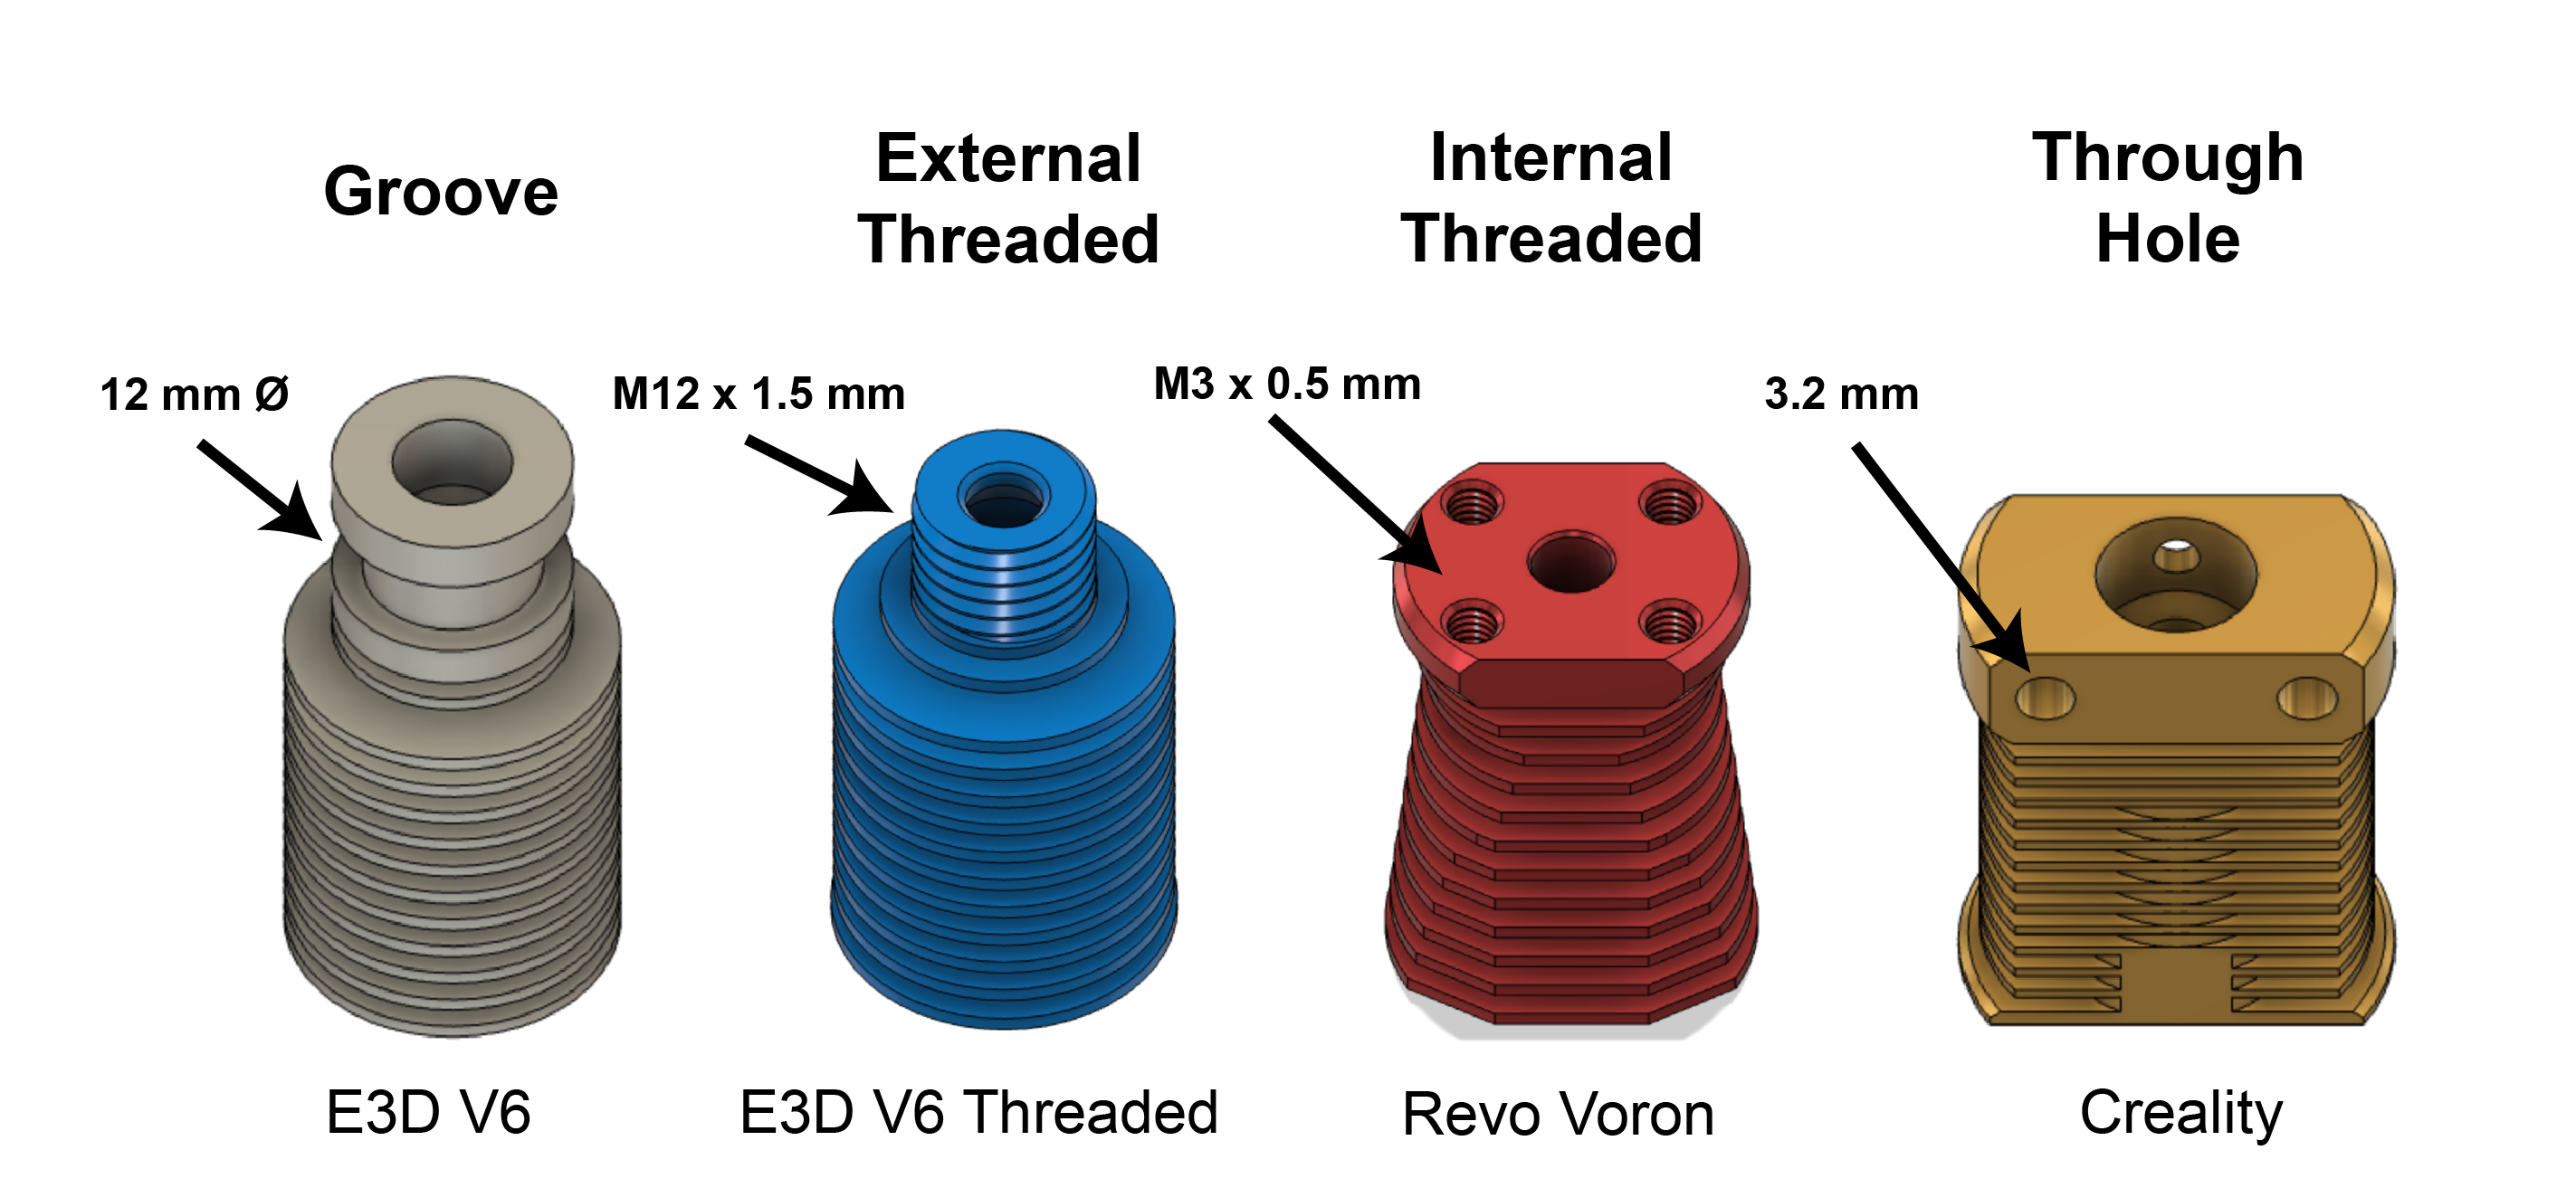 Mounting Styles for 3D Printer Extruder Cold End, including Groove Mount, External Threaded, Internal Threaded, and Through Hole